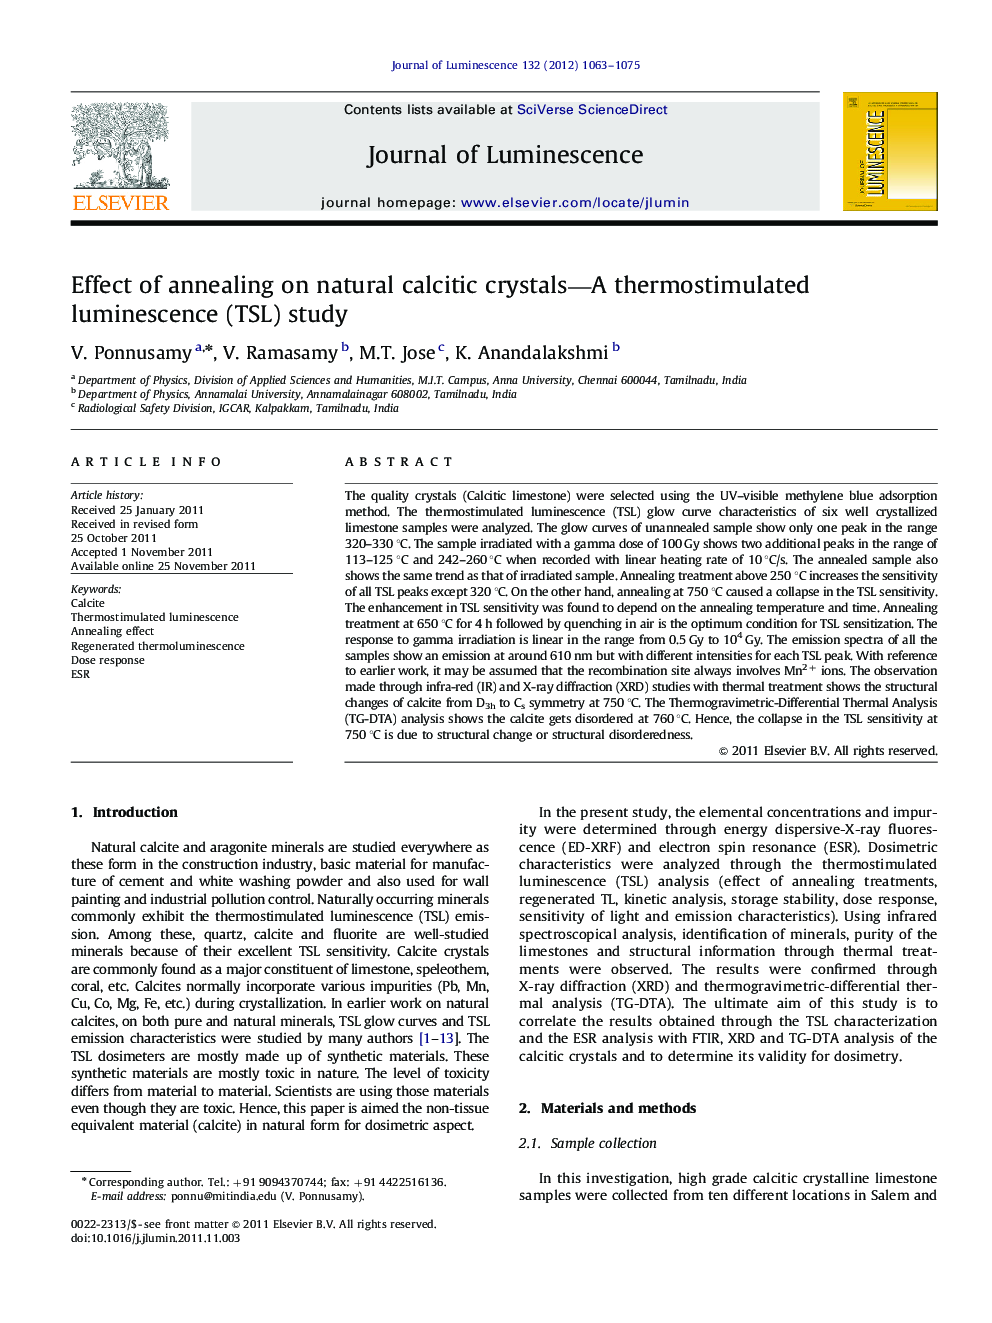 Effect of annealing on natural calcitic crystals-A thermostimulated luminescence (TSL) study